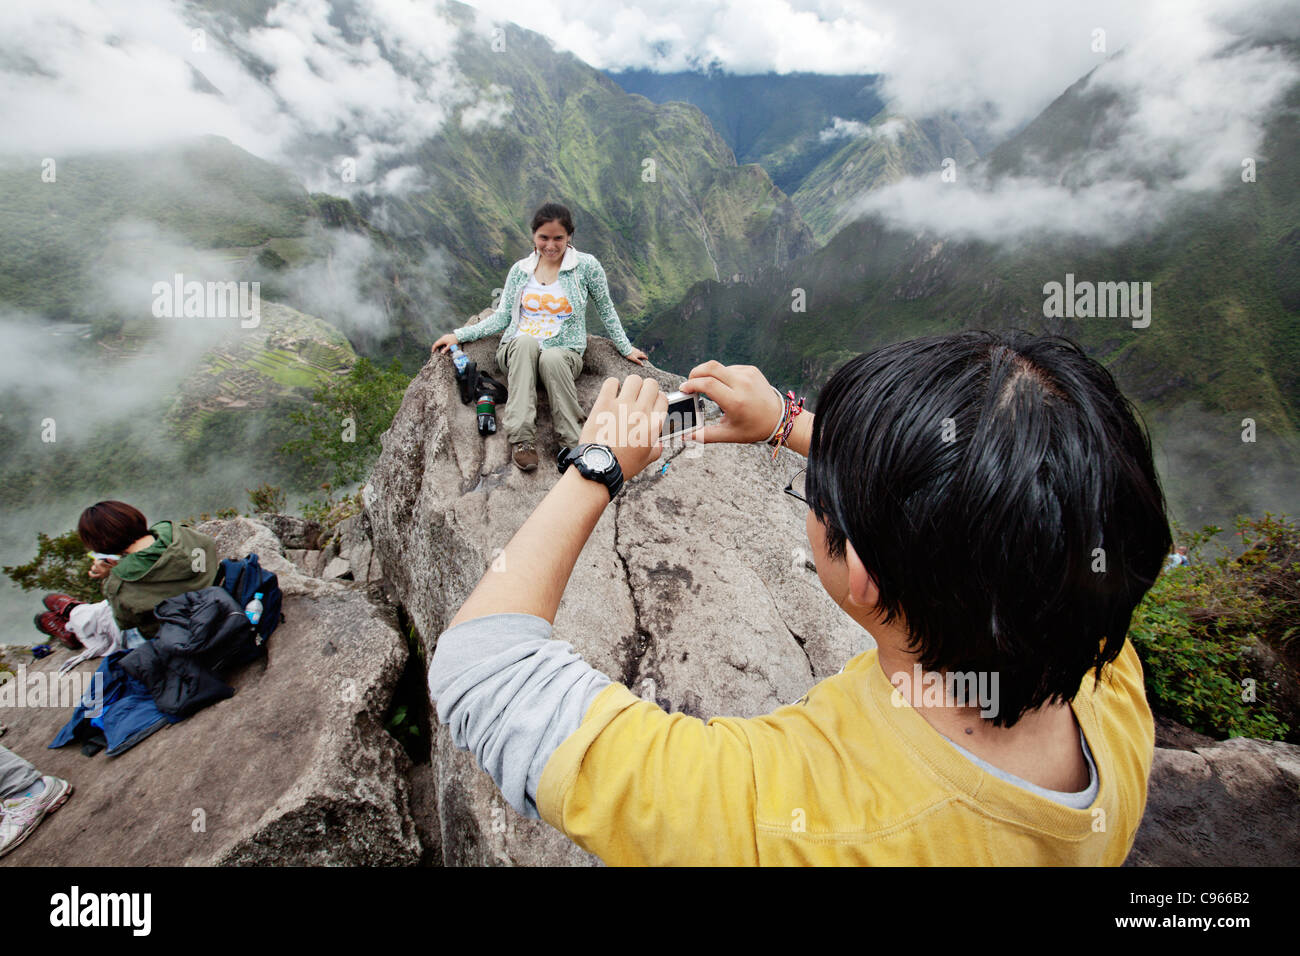 Tourists taking photos on Wayna Picchu mountain. In the background Machu Picchu, the most known tourist site in Andes mountains. Stock Photo